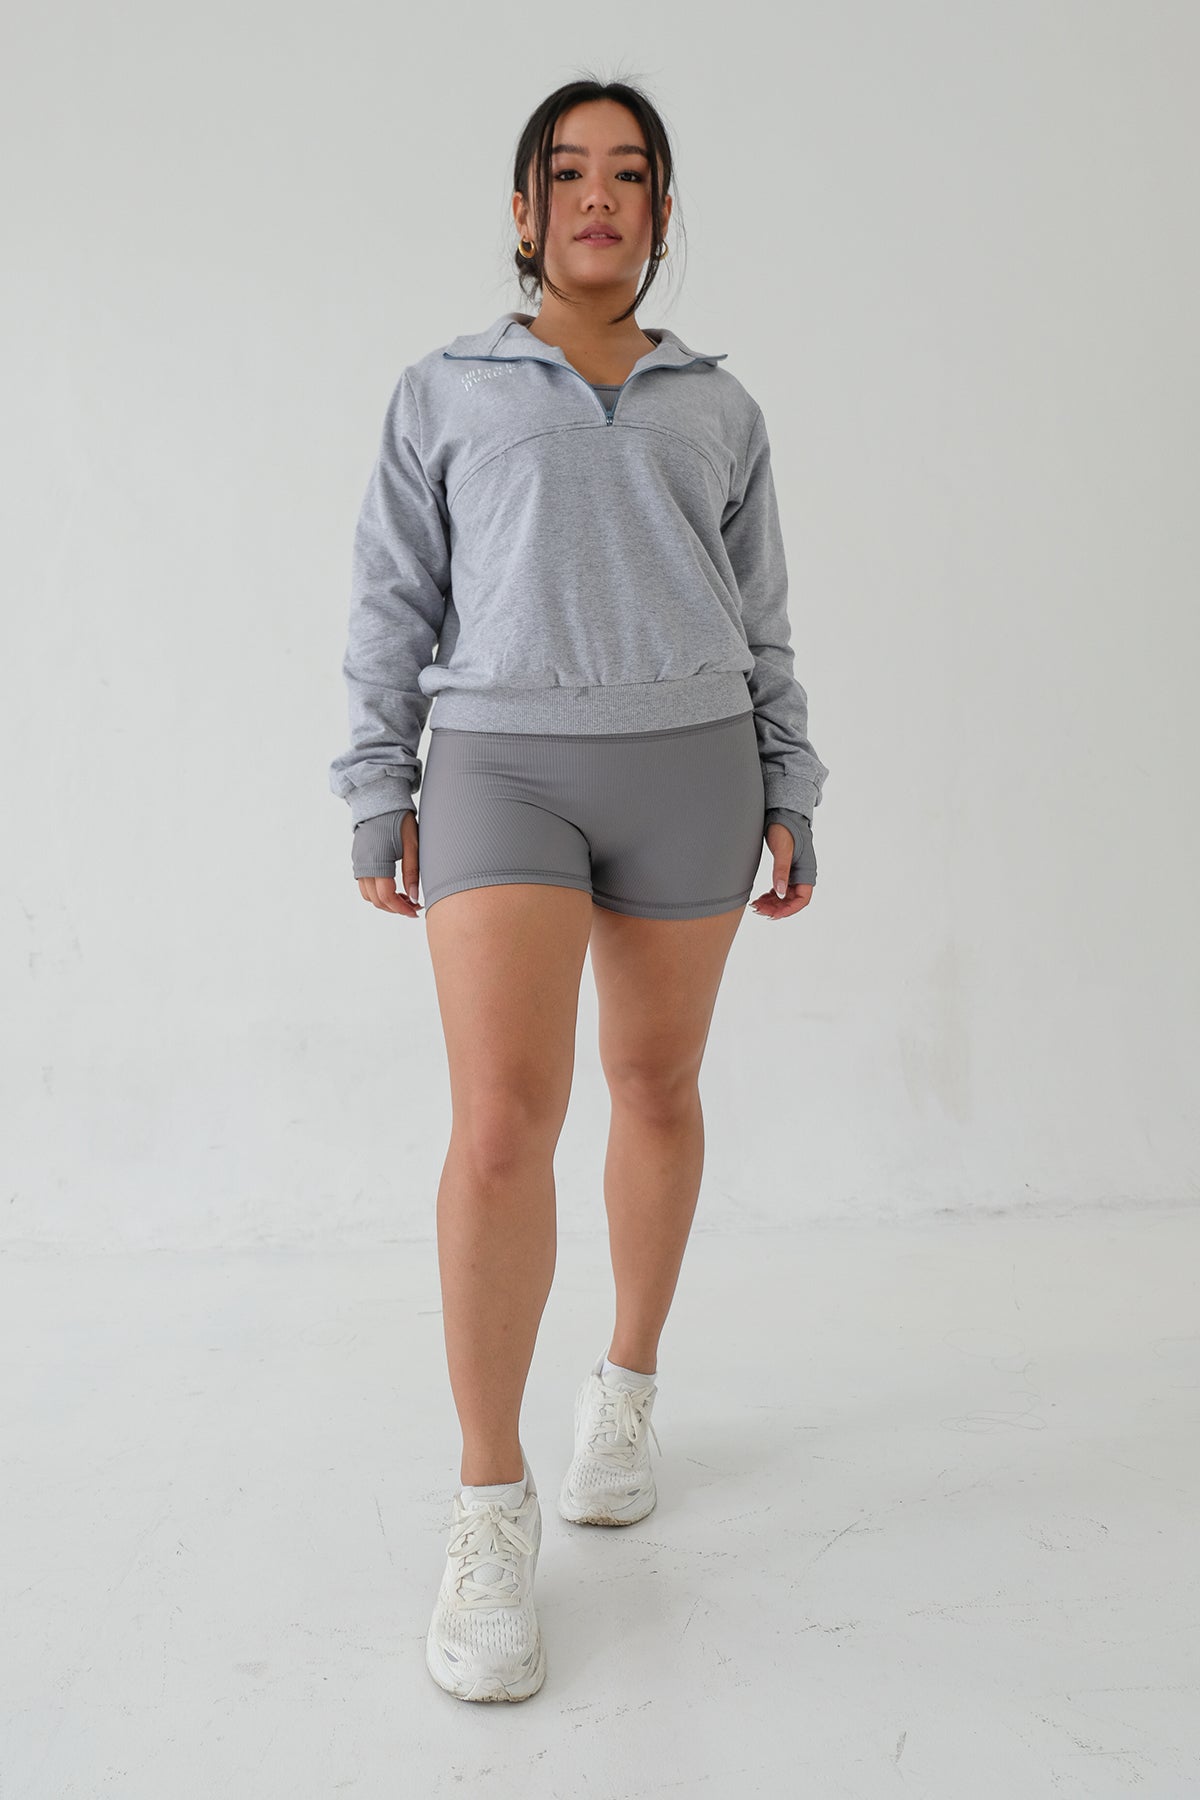 All Bodies Matter Sweater In Grey (1 LEFT)